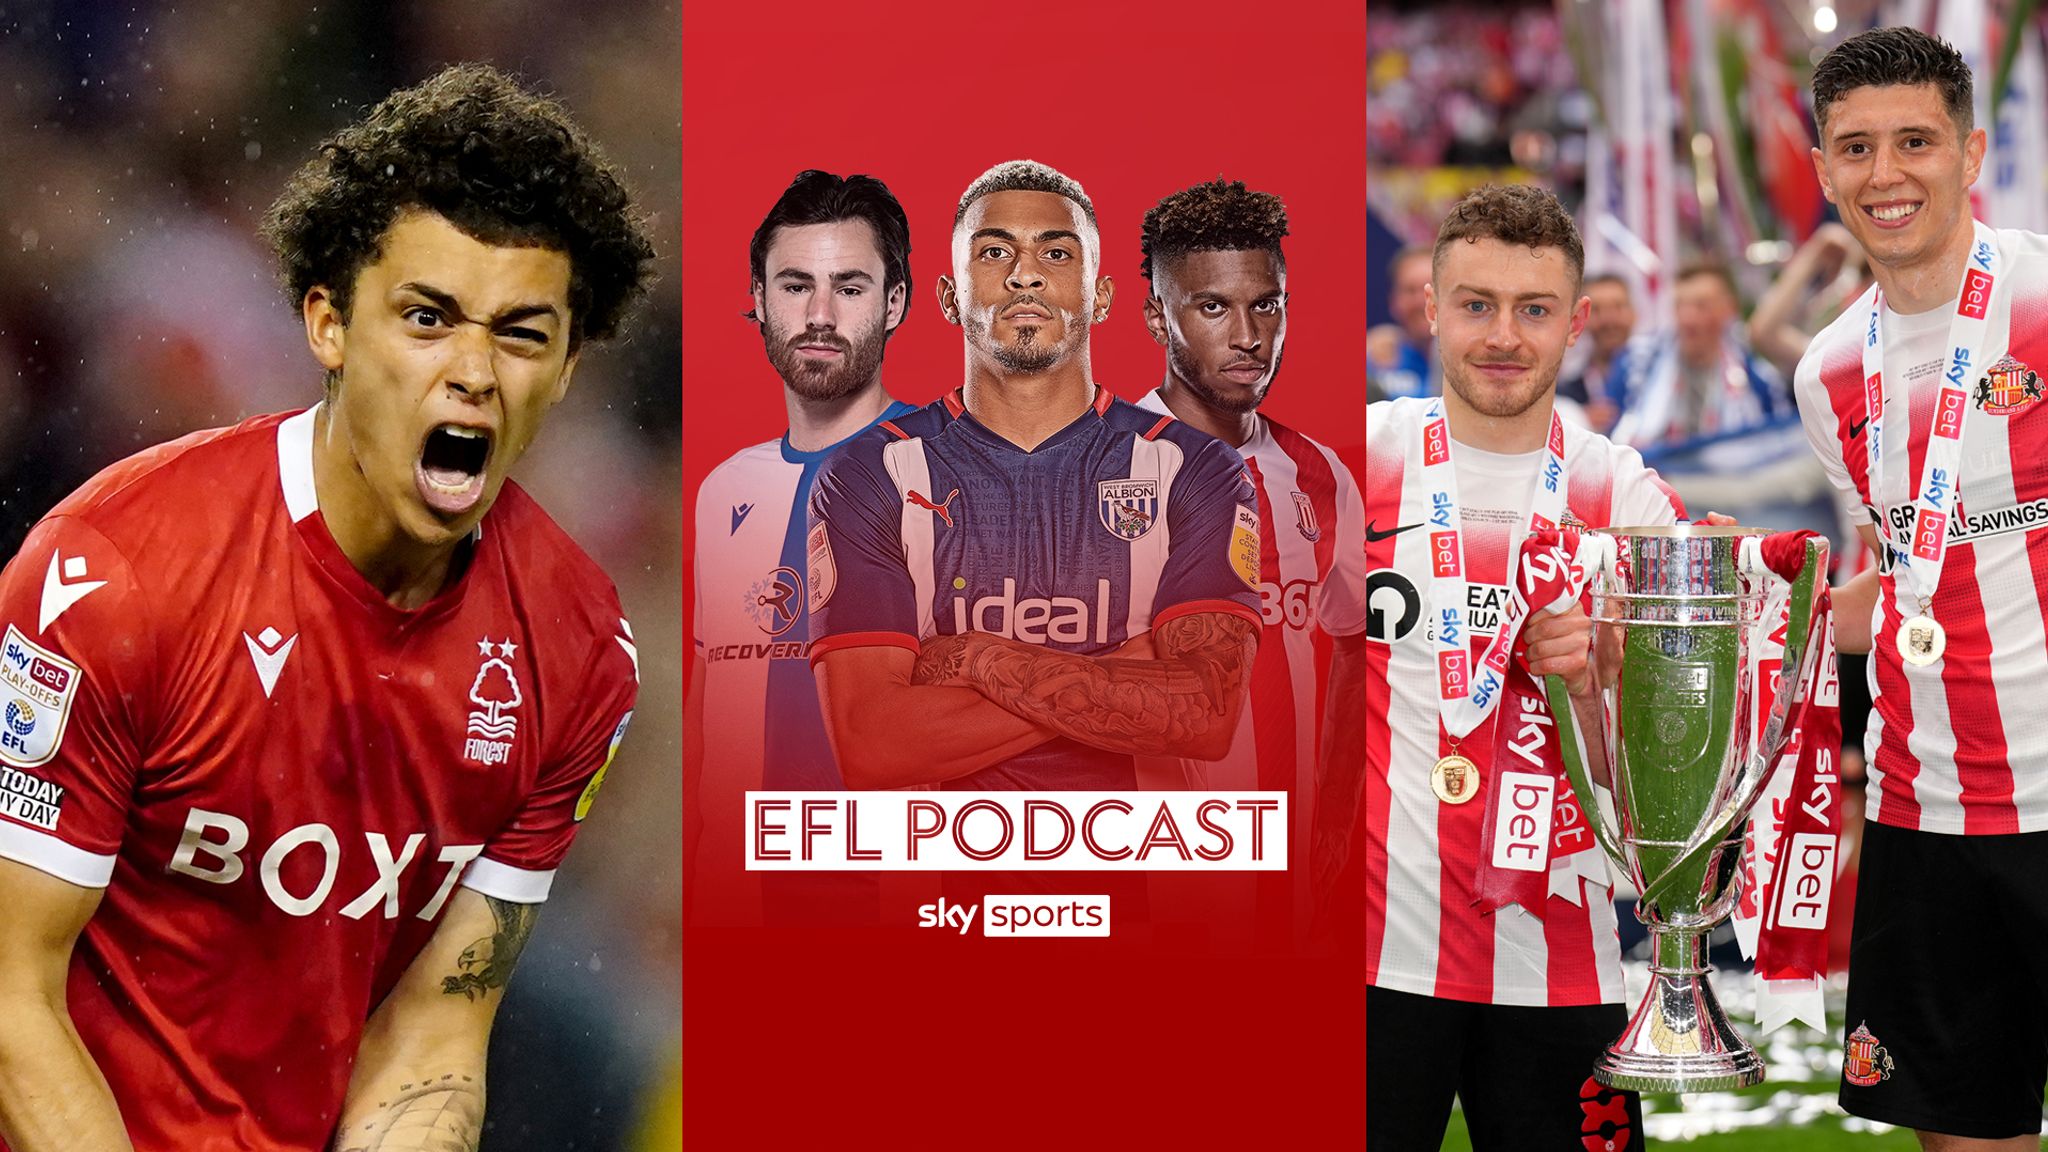 Subscribe to the Sky Sports EFL Podcast